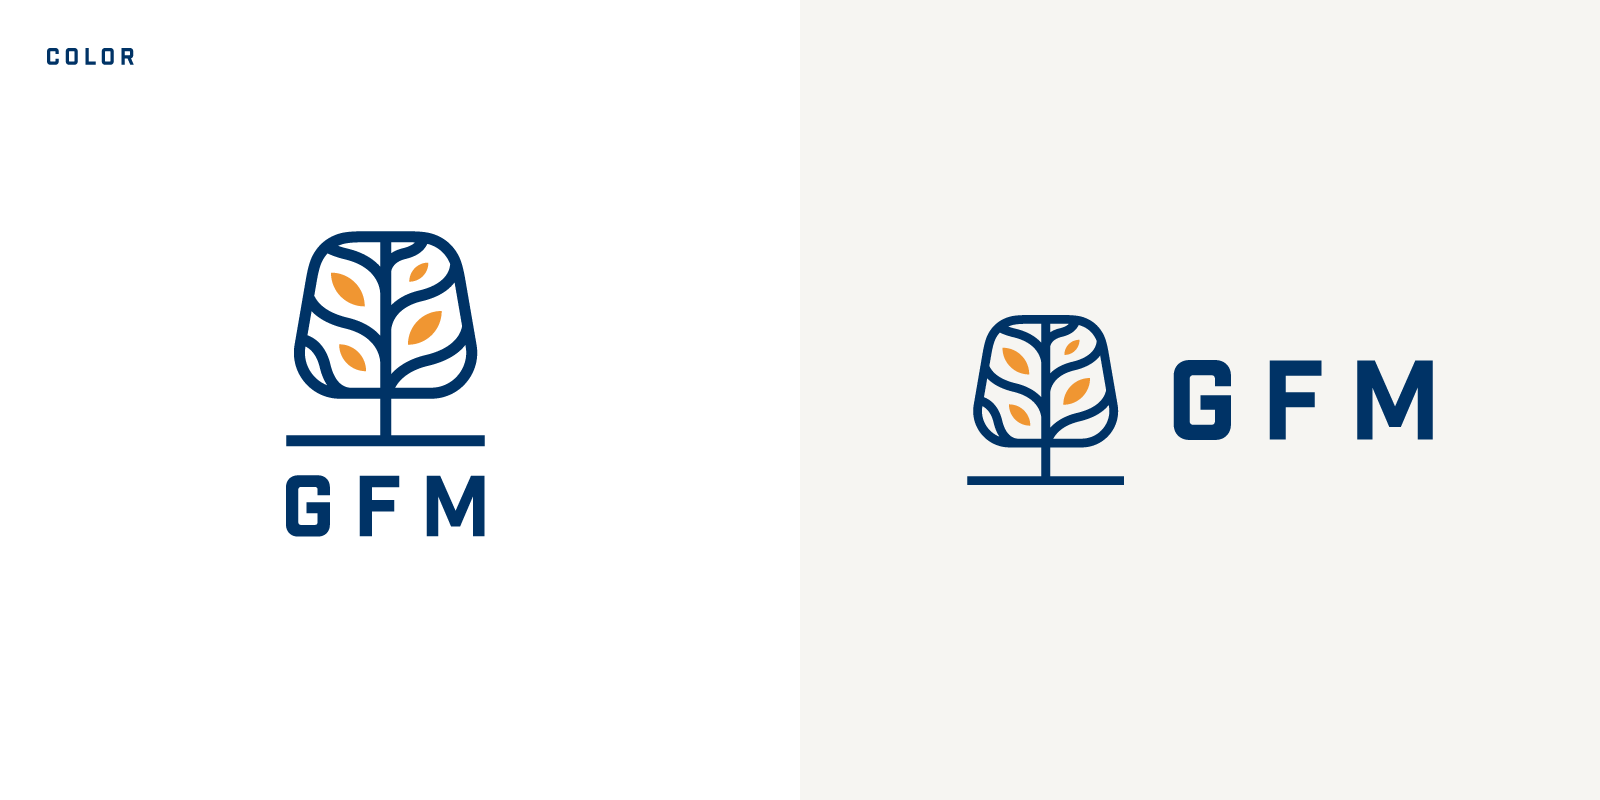 Goodwin Family Management Logos on white and gray backgrounds